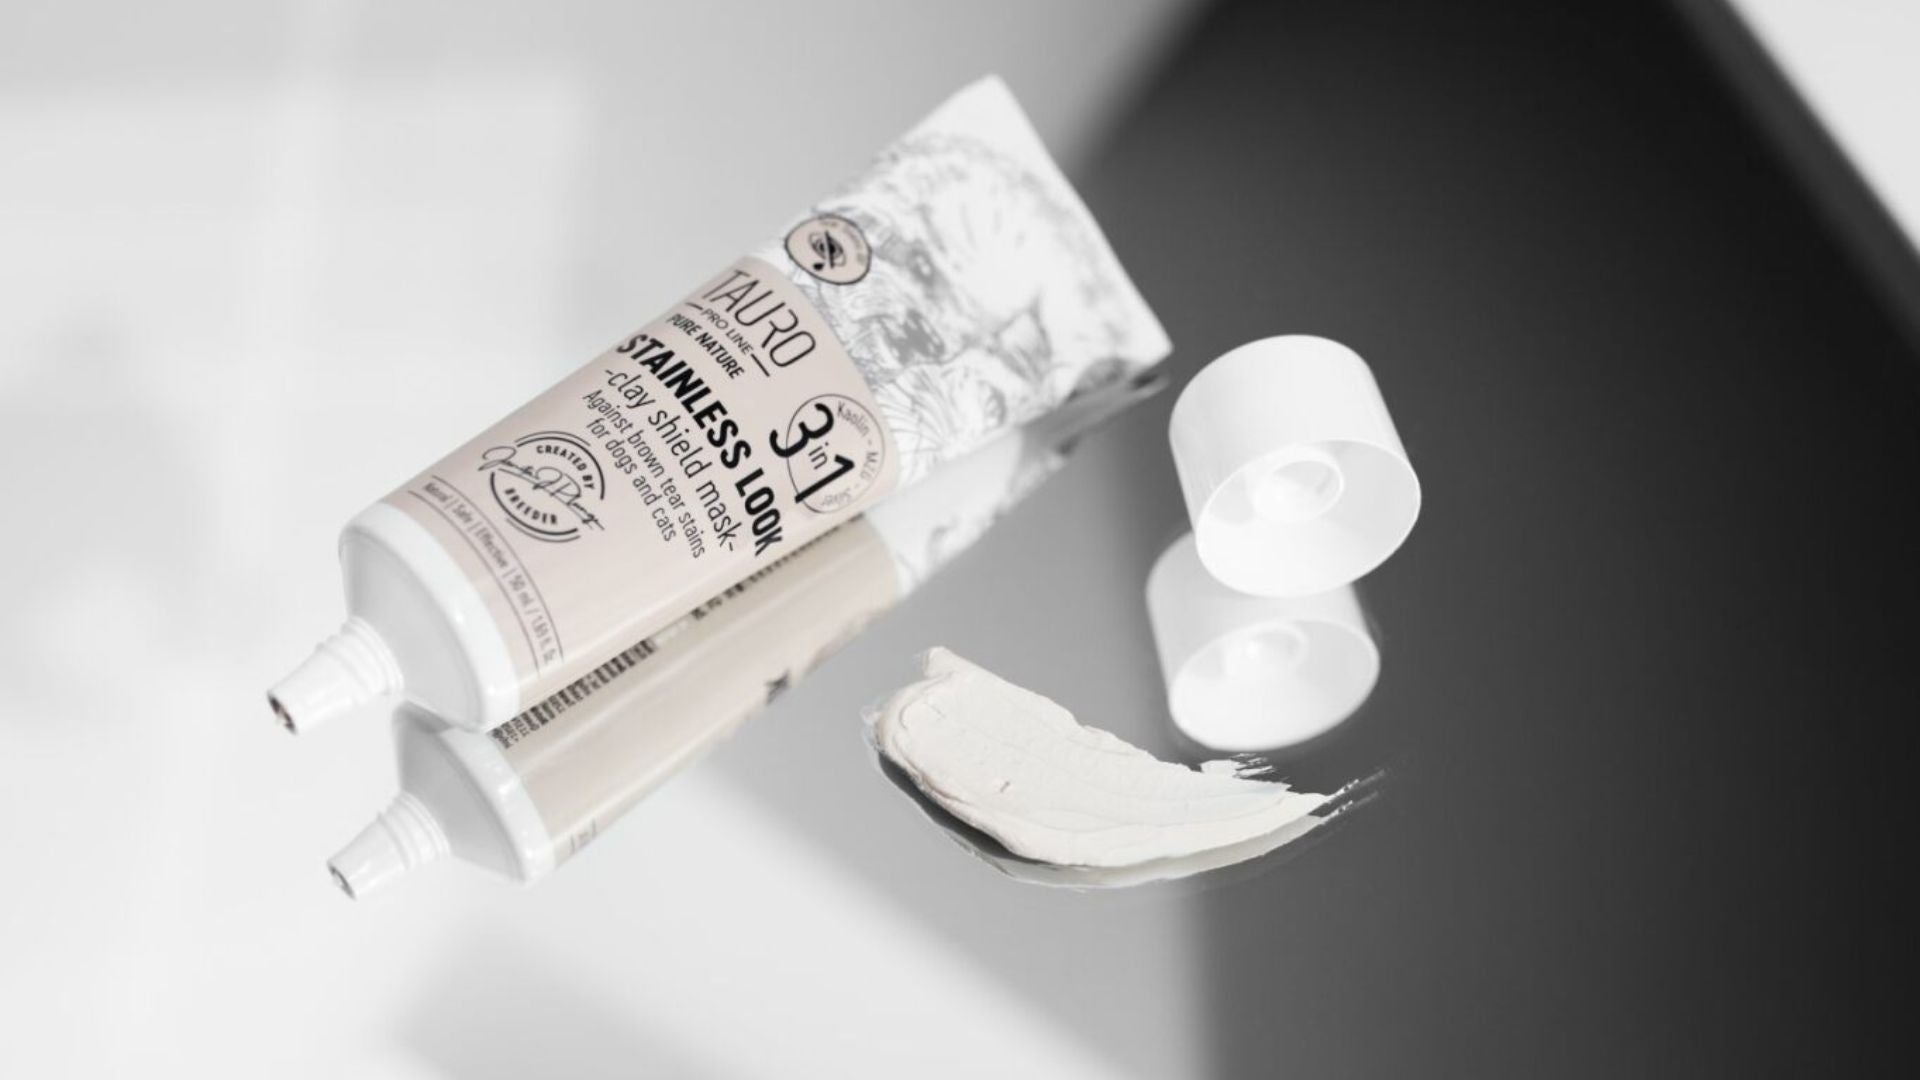 Say Goodbye to Tear Stains with Stainless Look Clay Mask